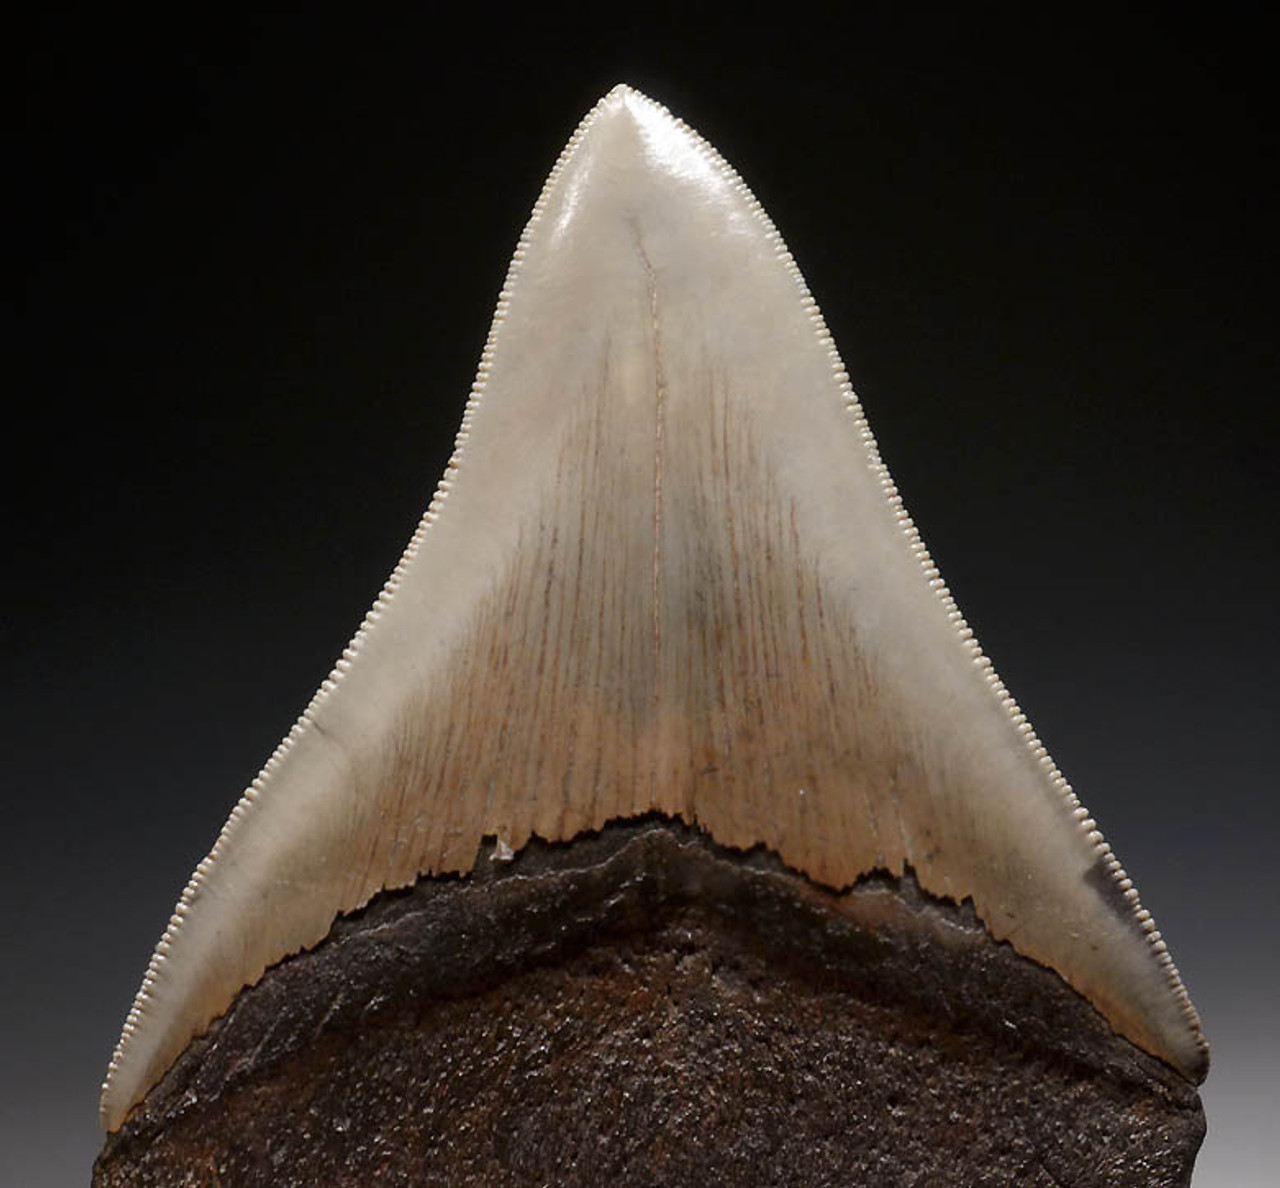 PEARL WHITE 4.5 INCH MEGALODON SHARK TOOTH WITH CHOICE PRESERVATION *SH6-257